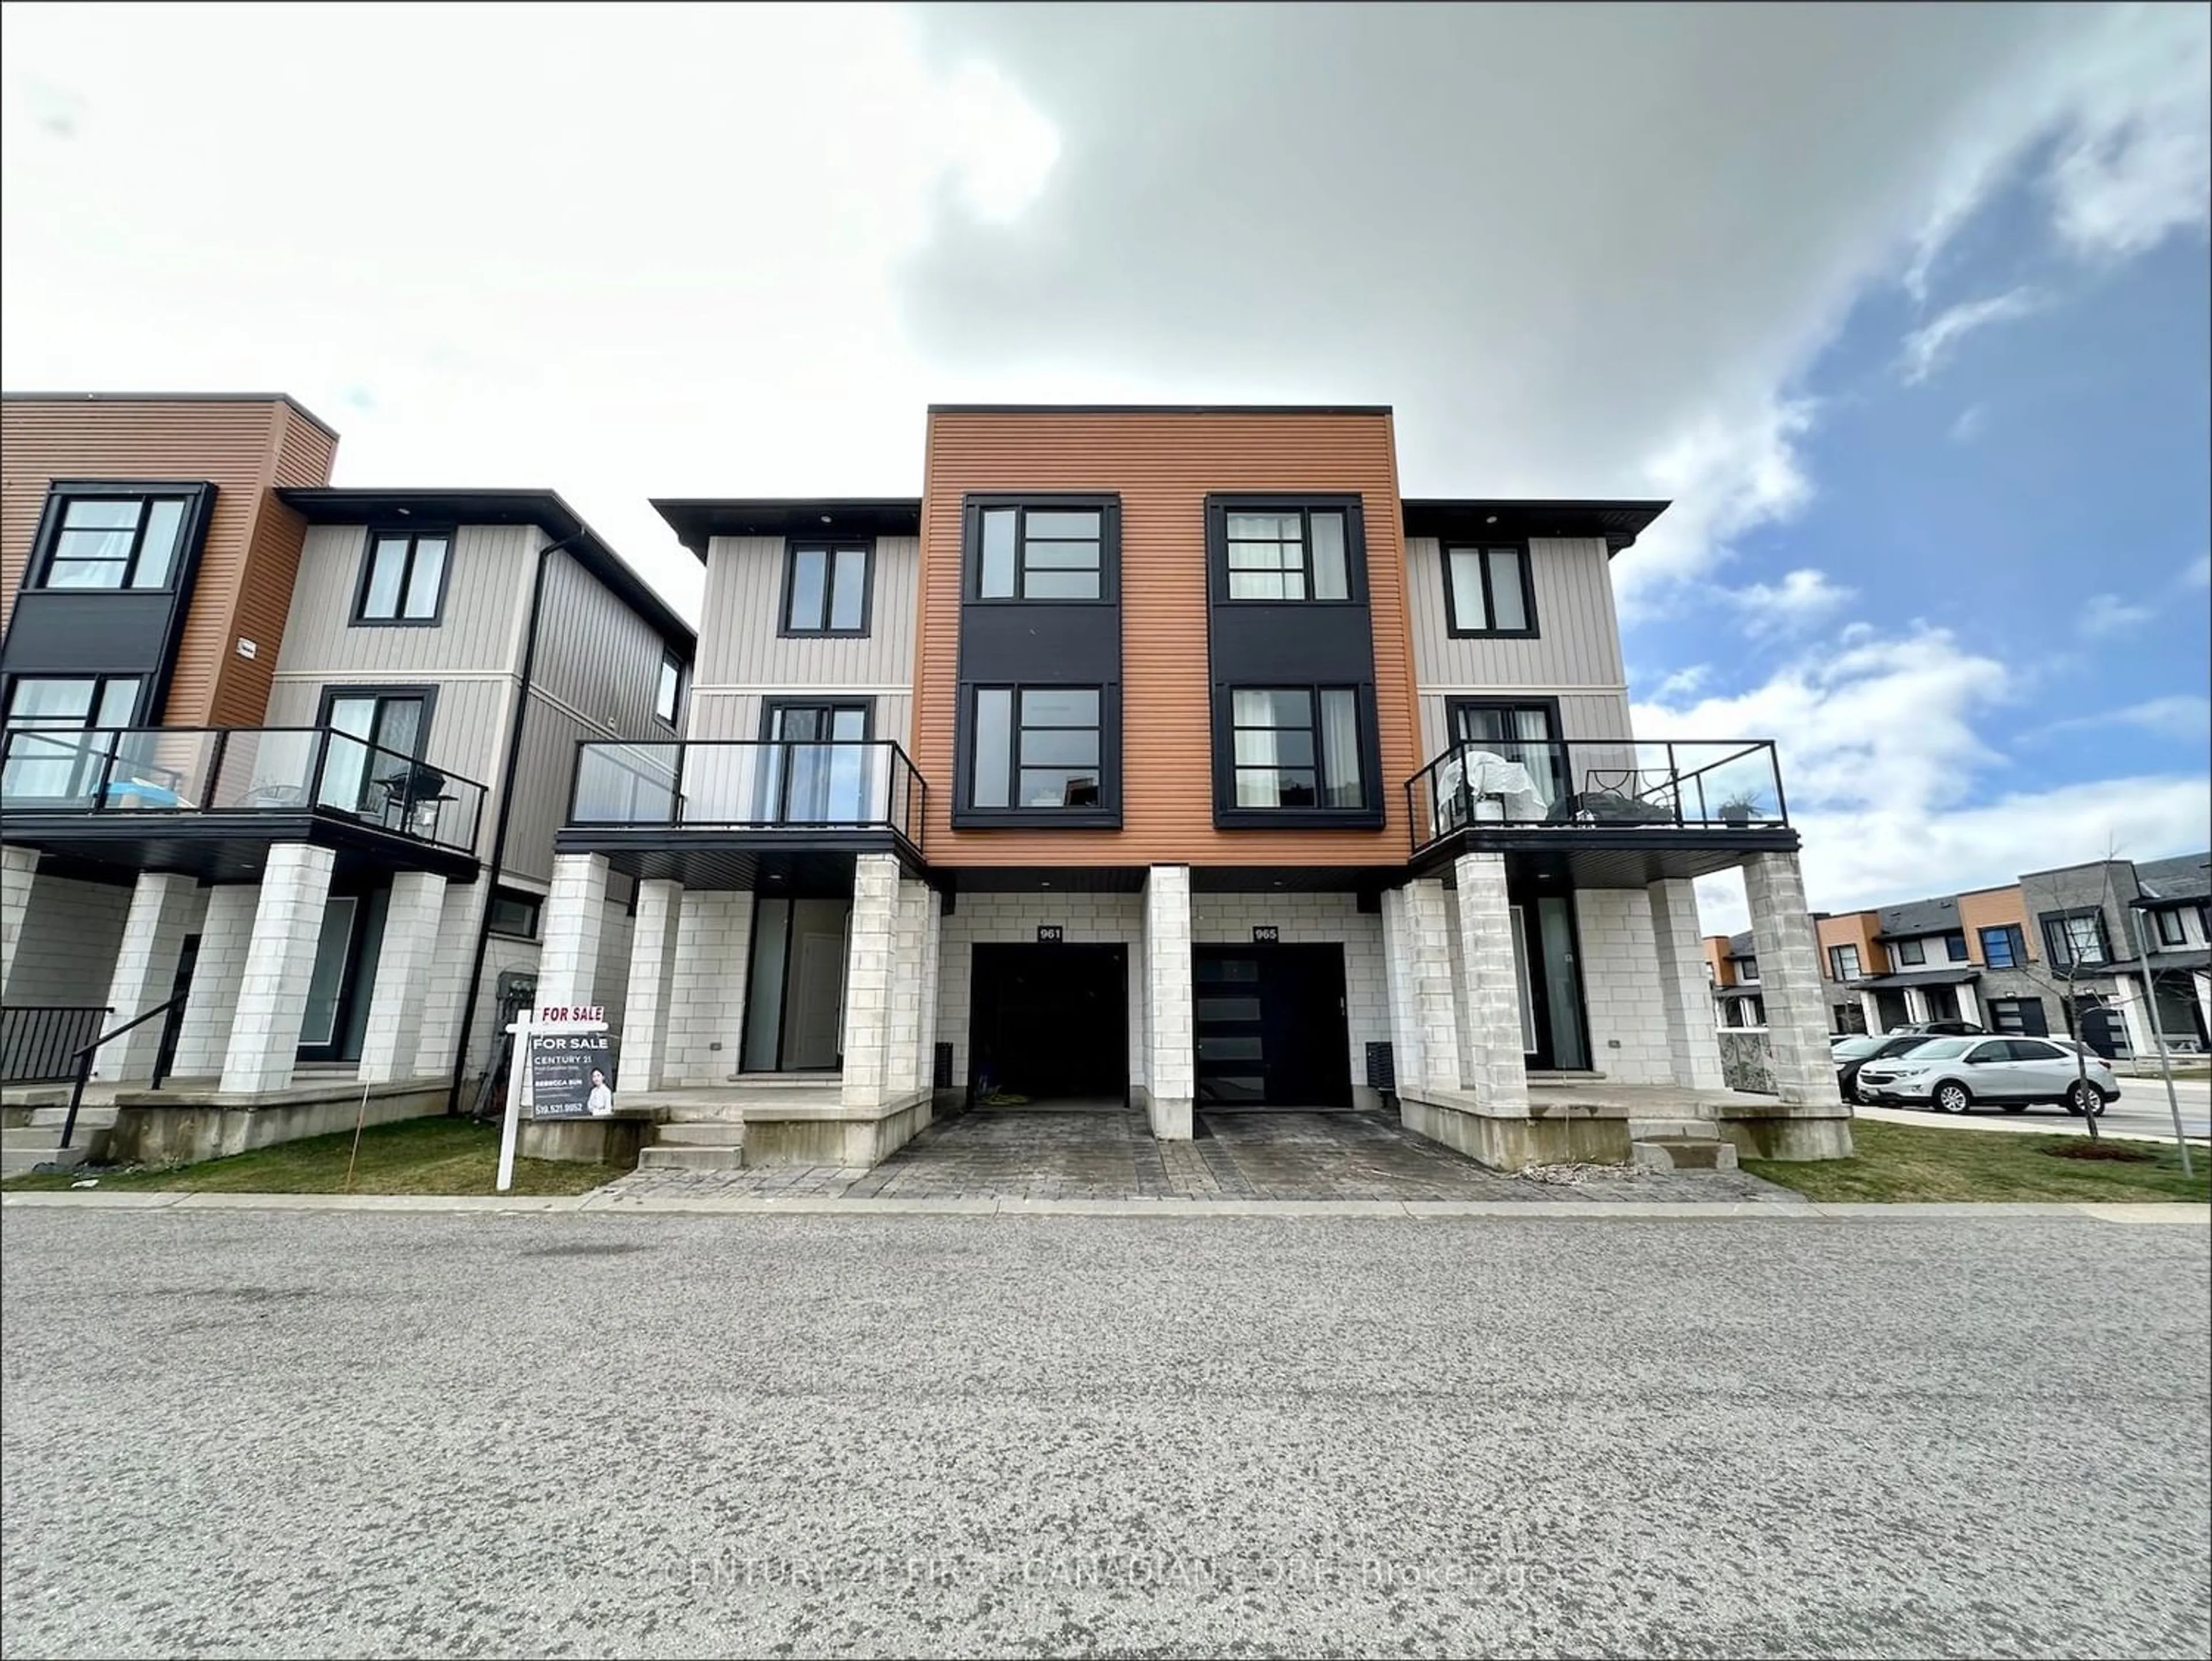 A pic from exterior of the house or condo for 961 Manhattan Way #961, London Ontario N6H 5J9